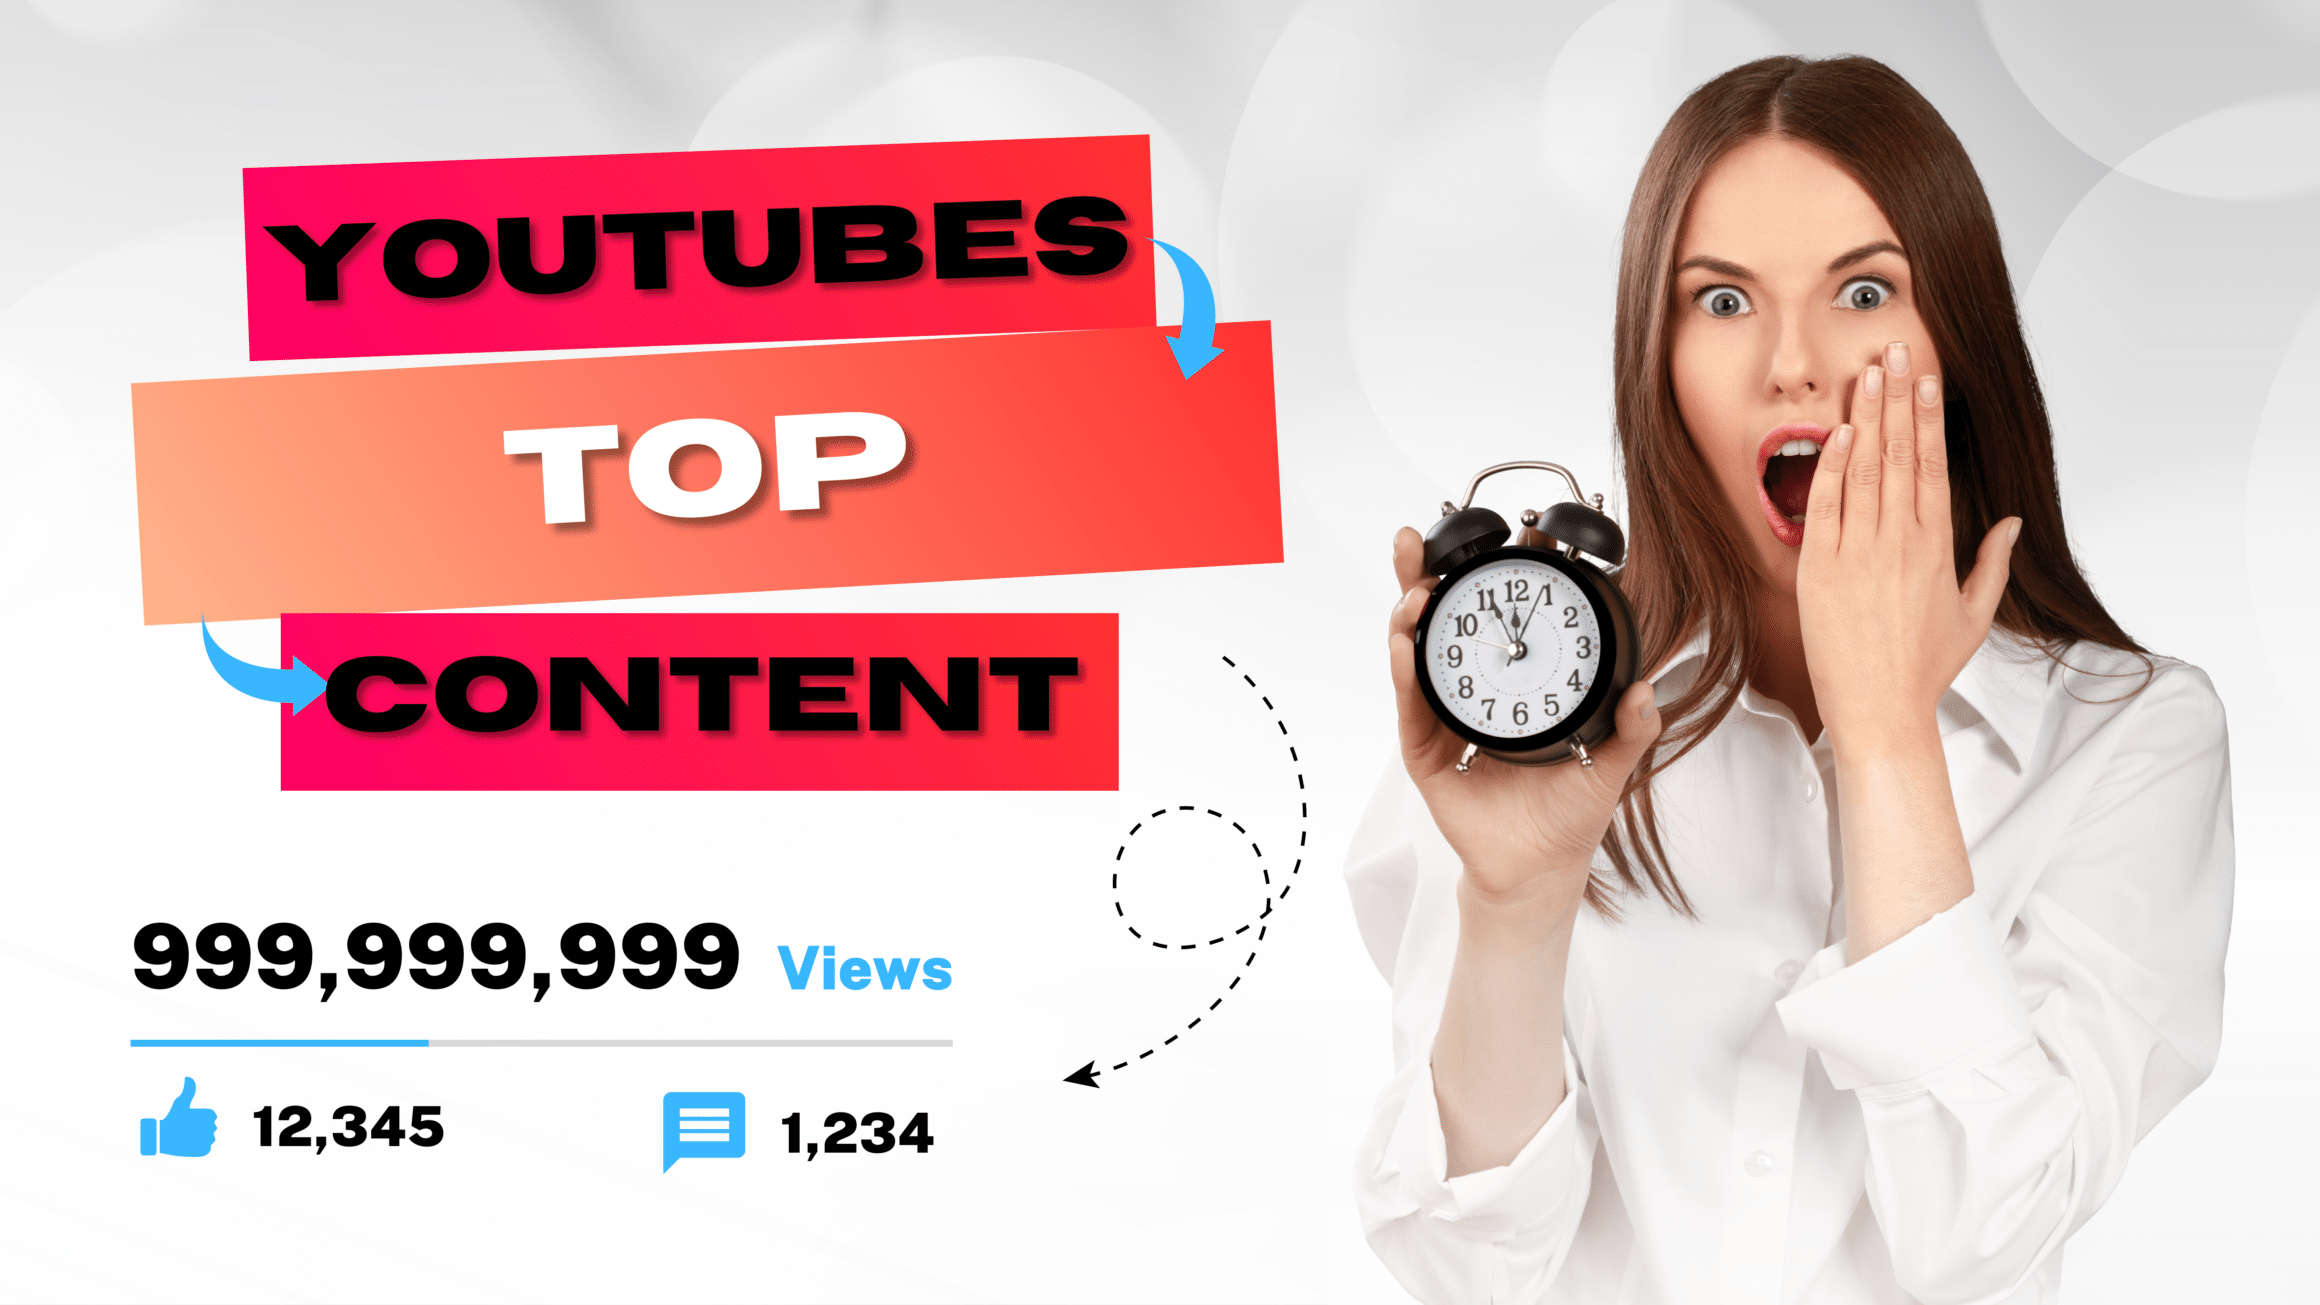 YouTubes top content